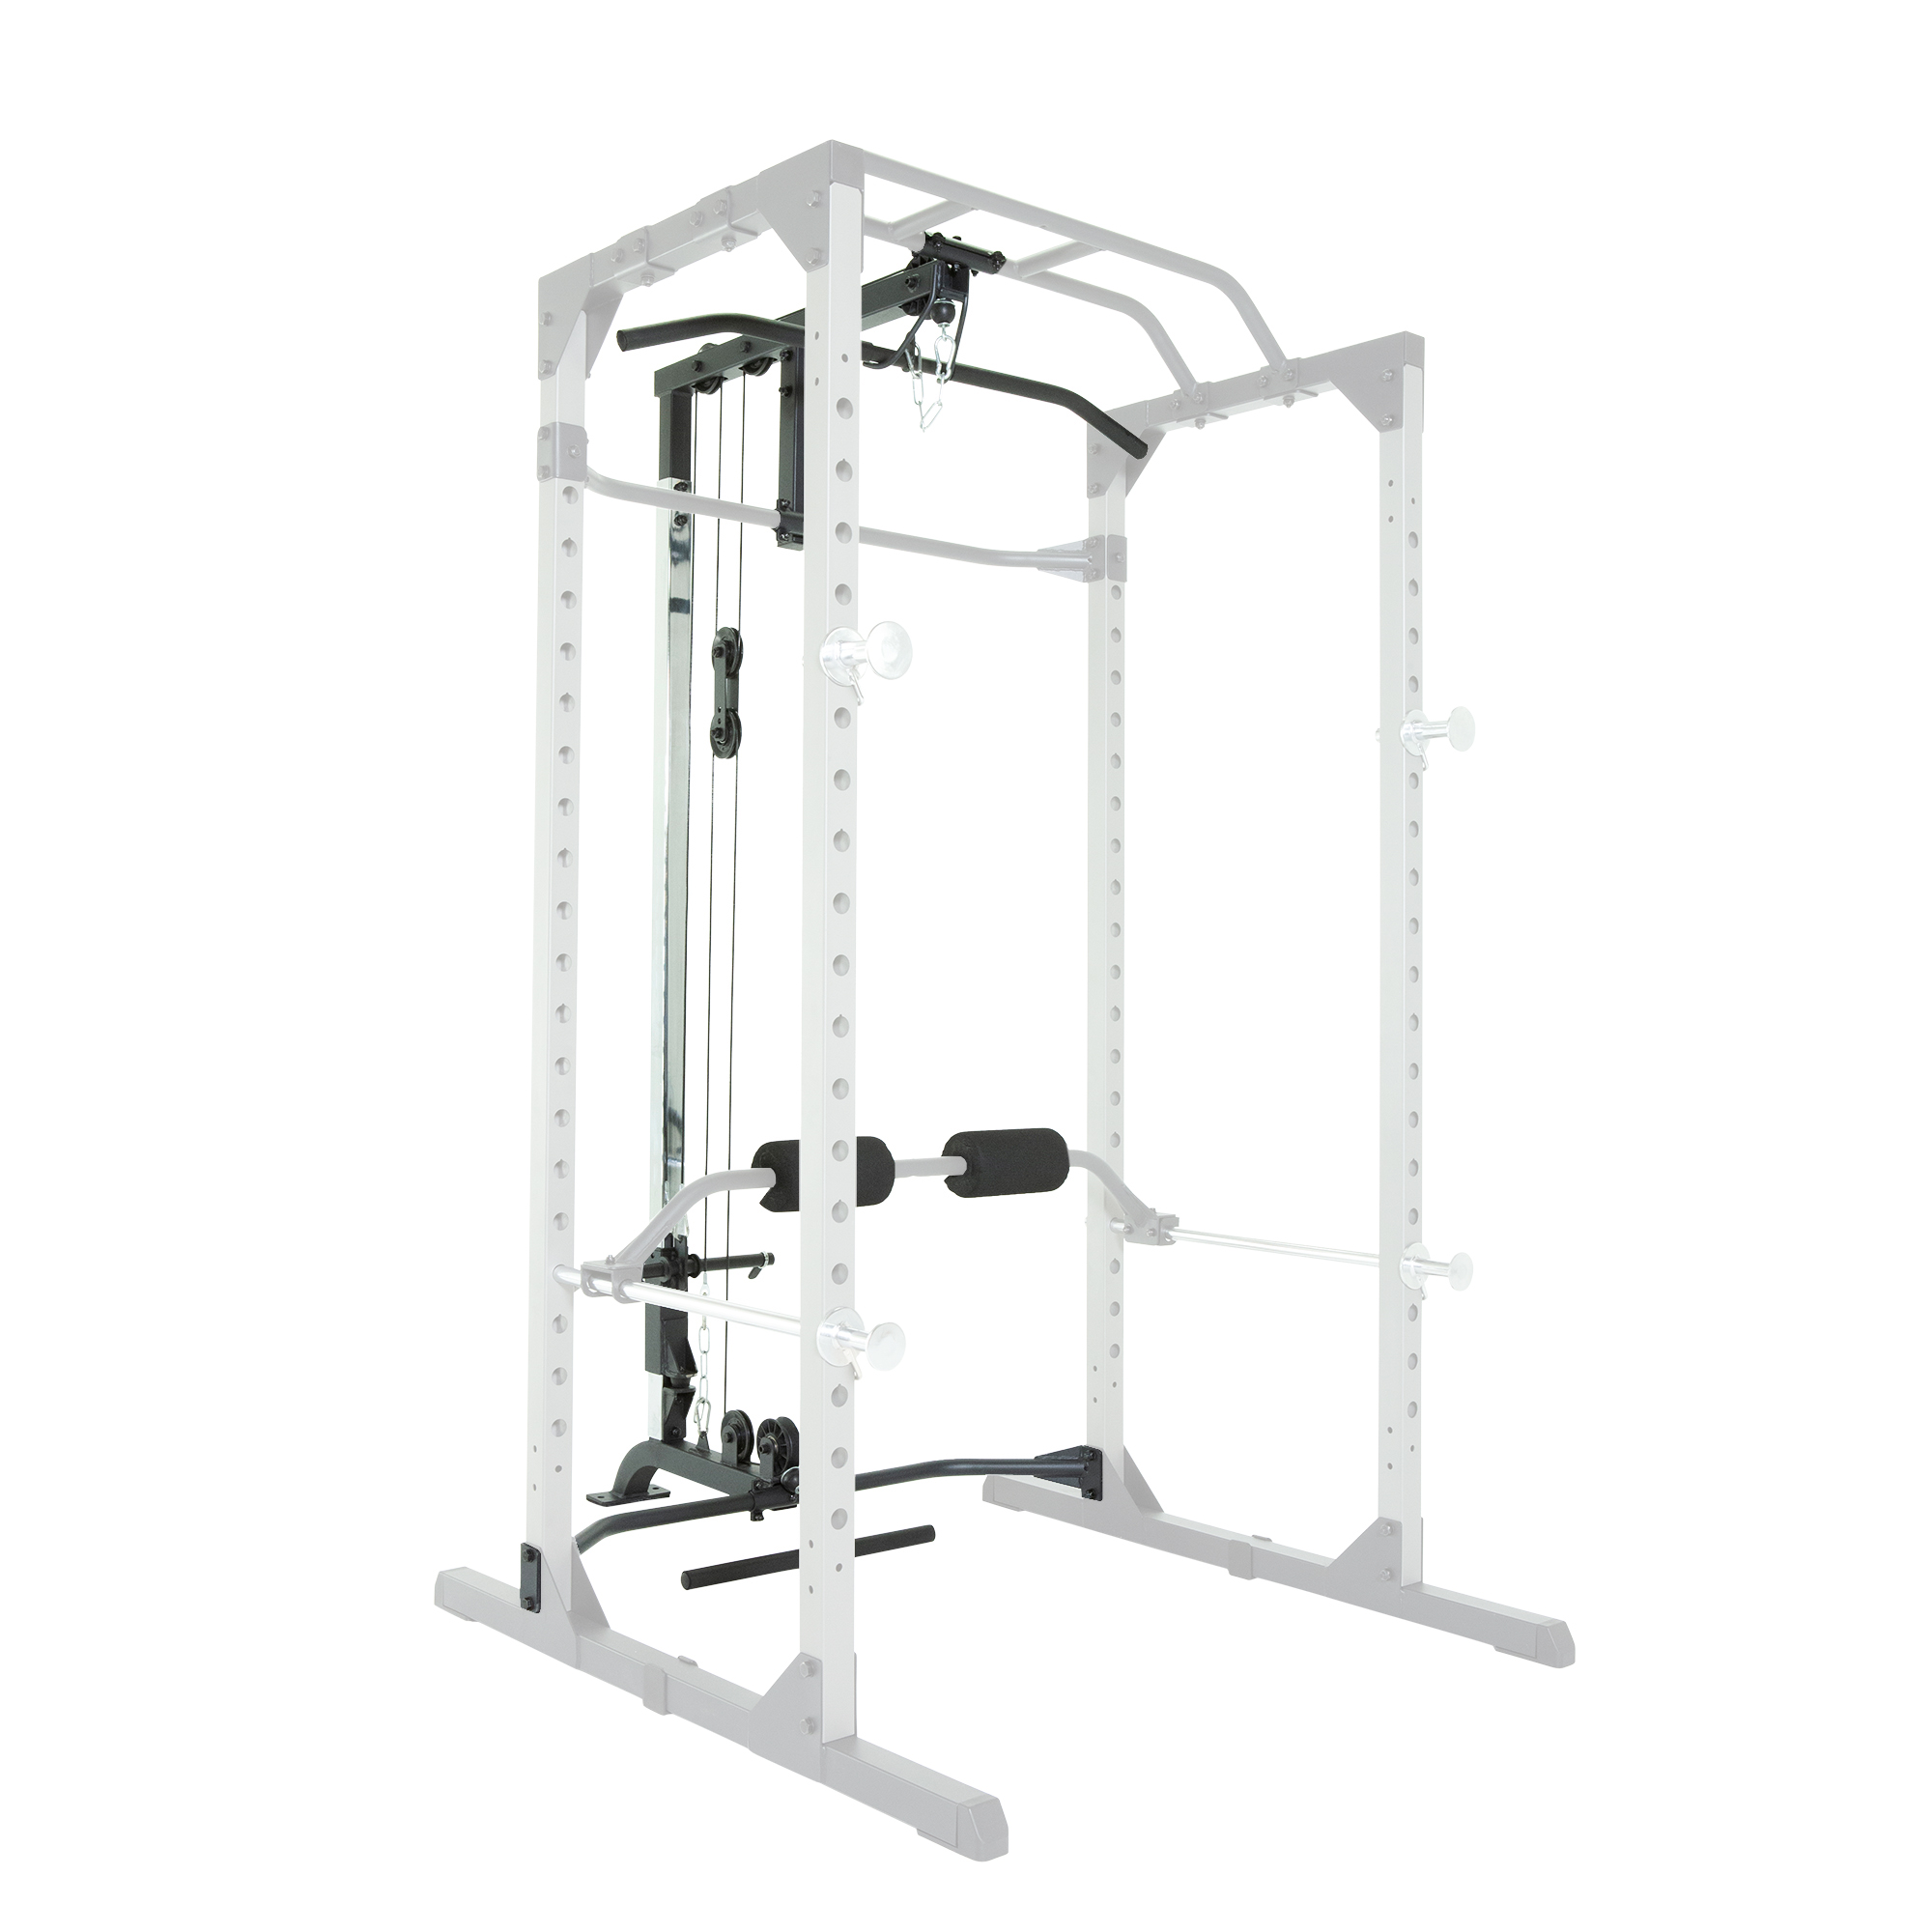 PROGEAR 310 Olympic Lat Pull Down and Low Row Cable Attachment